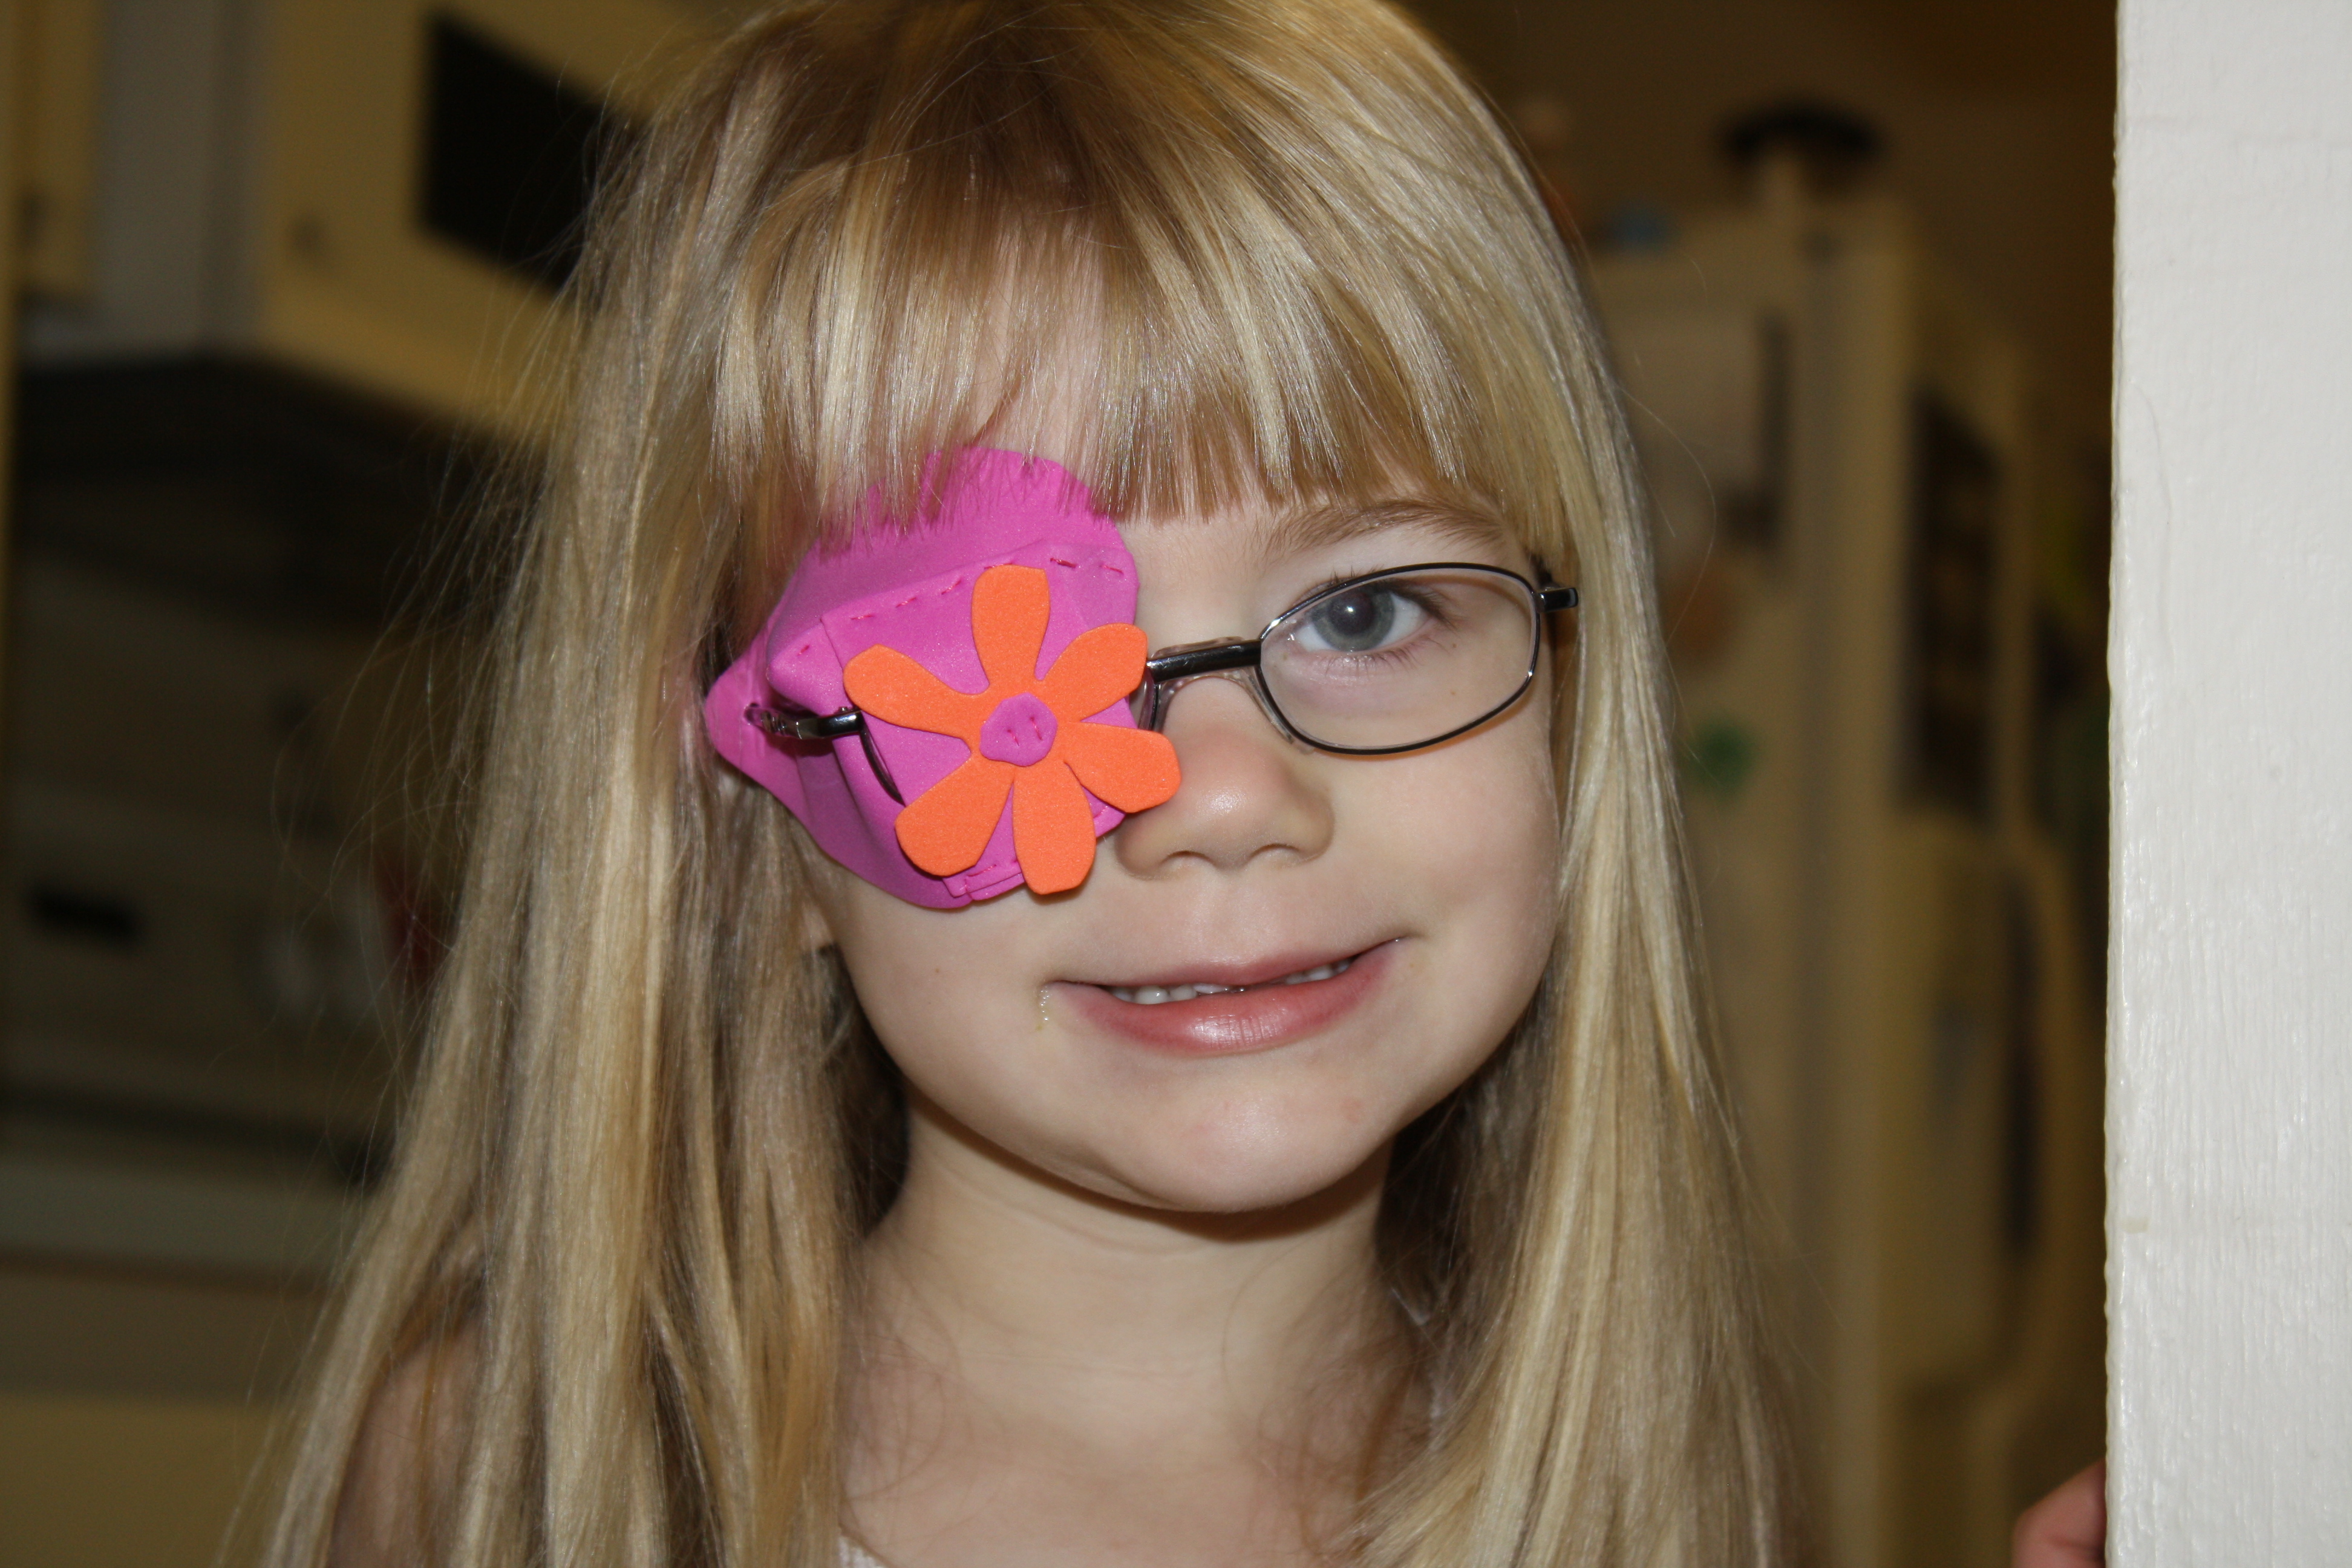 eye patches for children's glasses